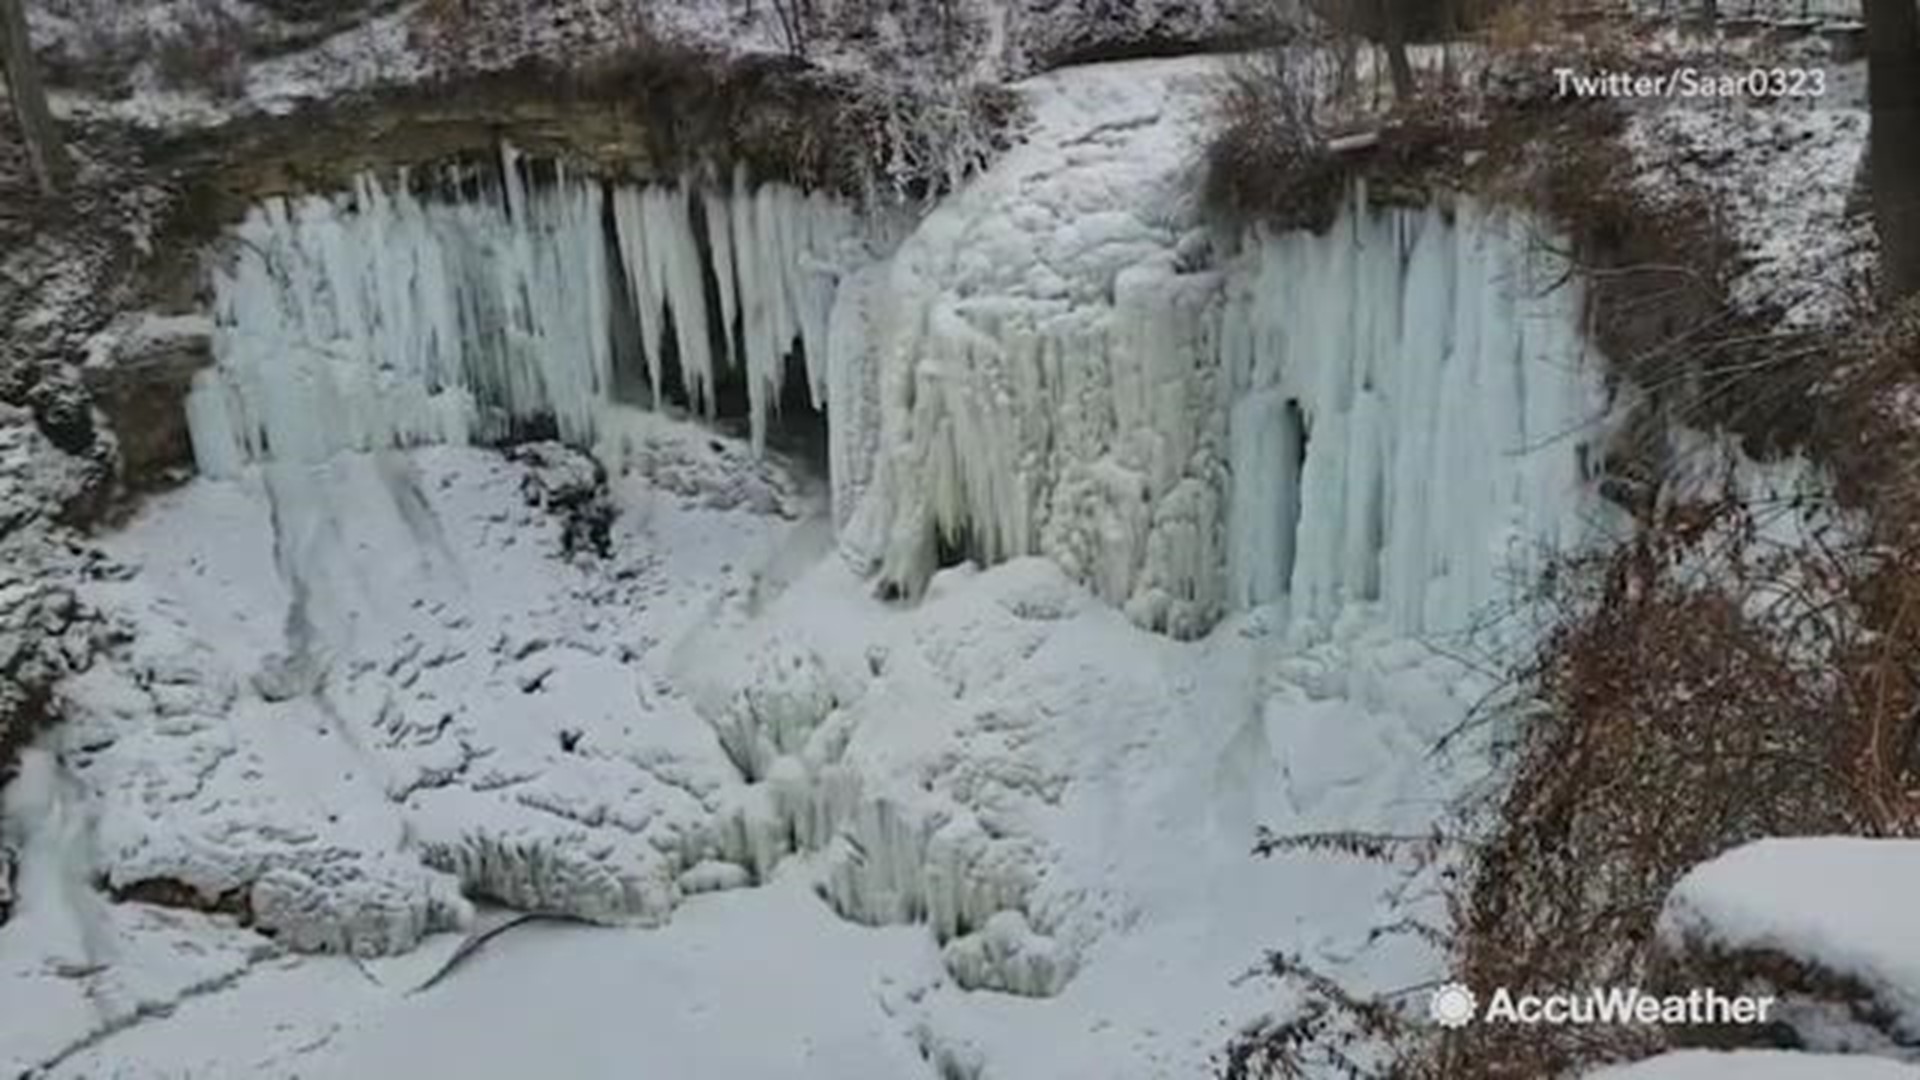 A Twitter user posted a video on Jan. 13 showing the Minnehaha Falls in Minneapolis, Minnesota, starting to freeze. One week later, the same Twitter user updated his followers that the waterfall did, in fact freeze solid.